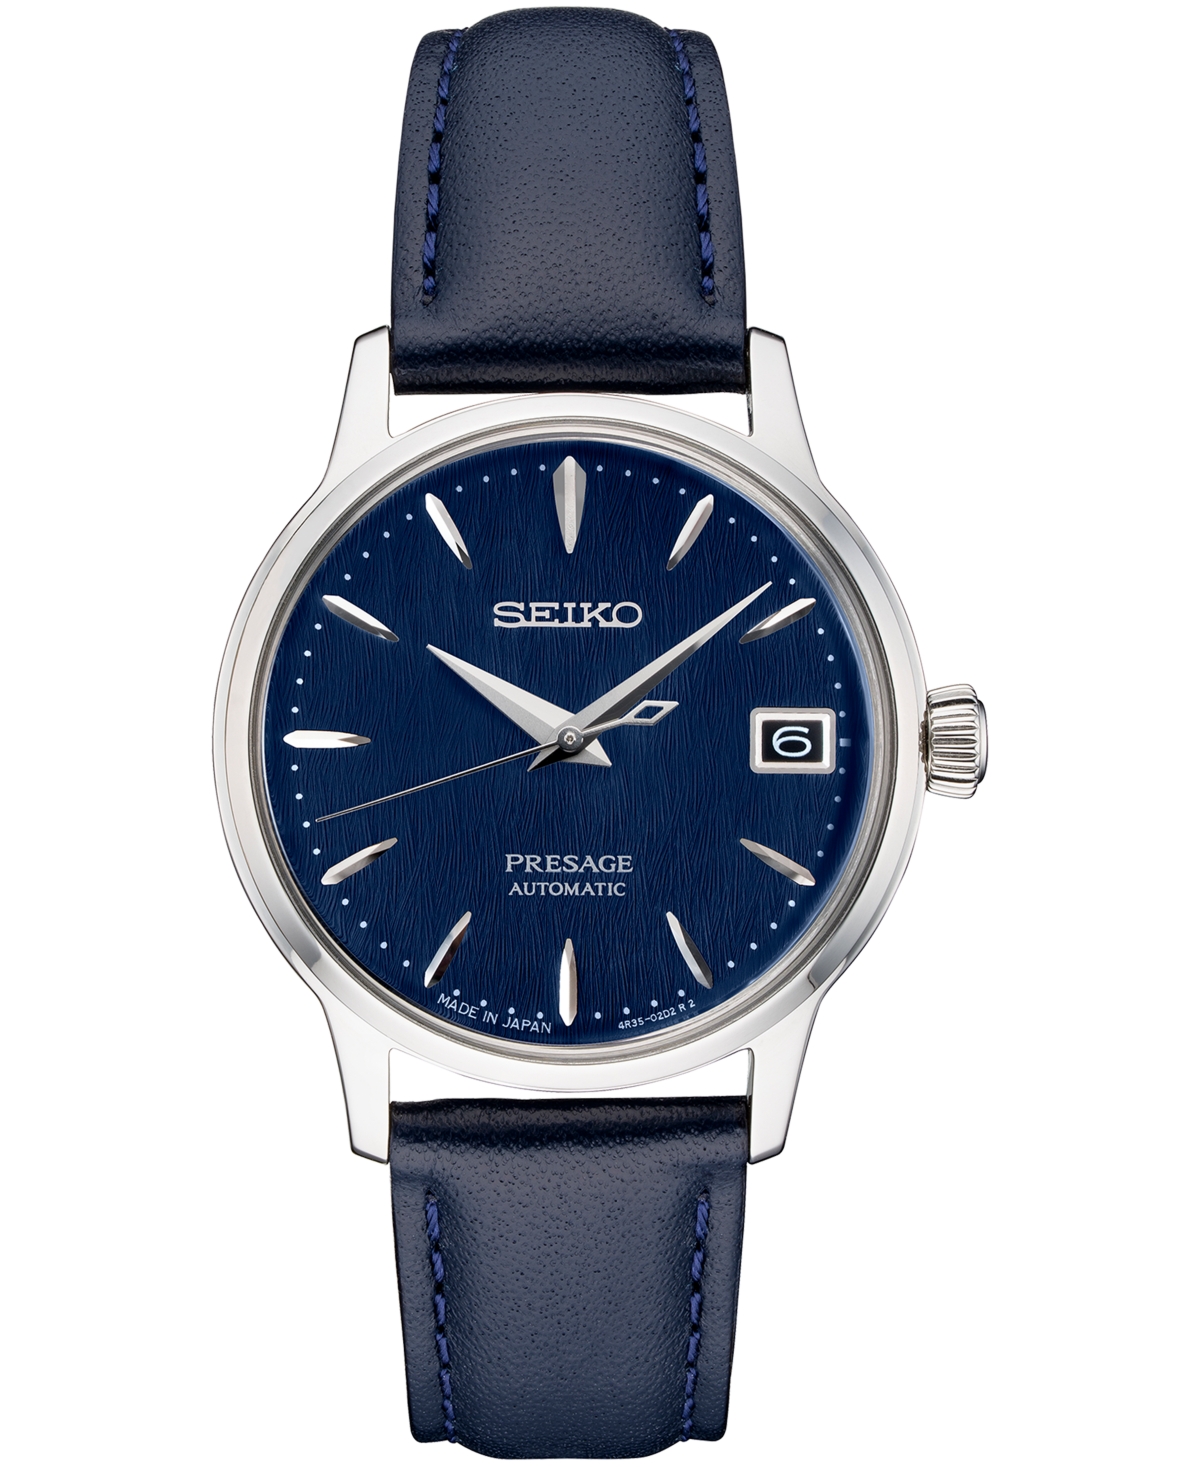 Seiko Women's Automatic Presage Blue Leather Strap Watch 34mm & Reviews -  All Watches - Jewelry & Watches - Macy's